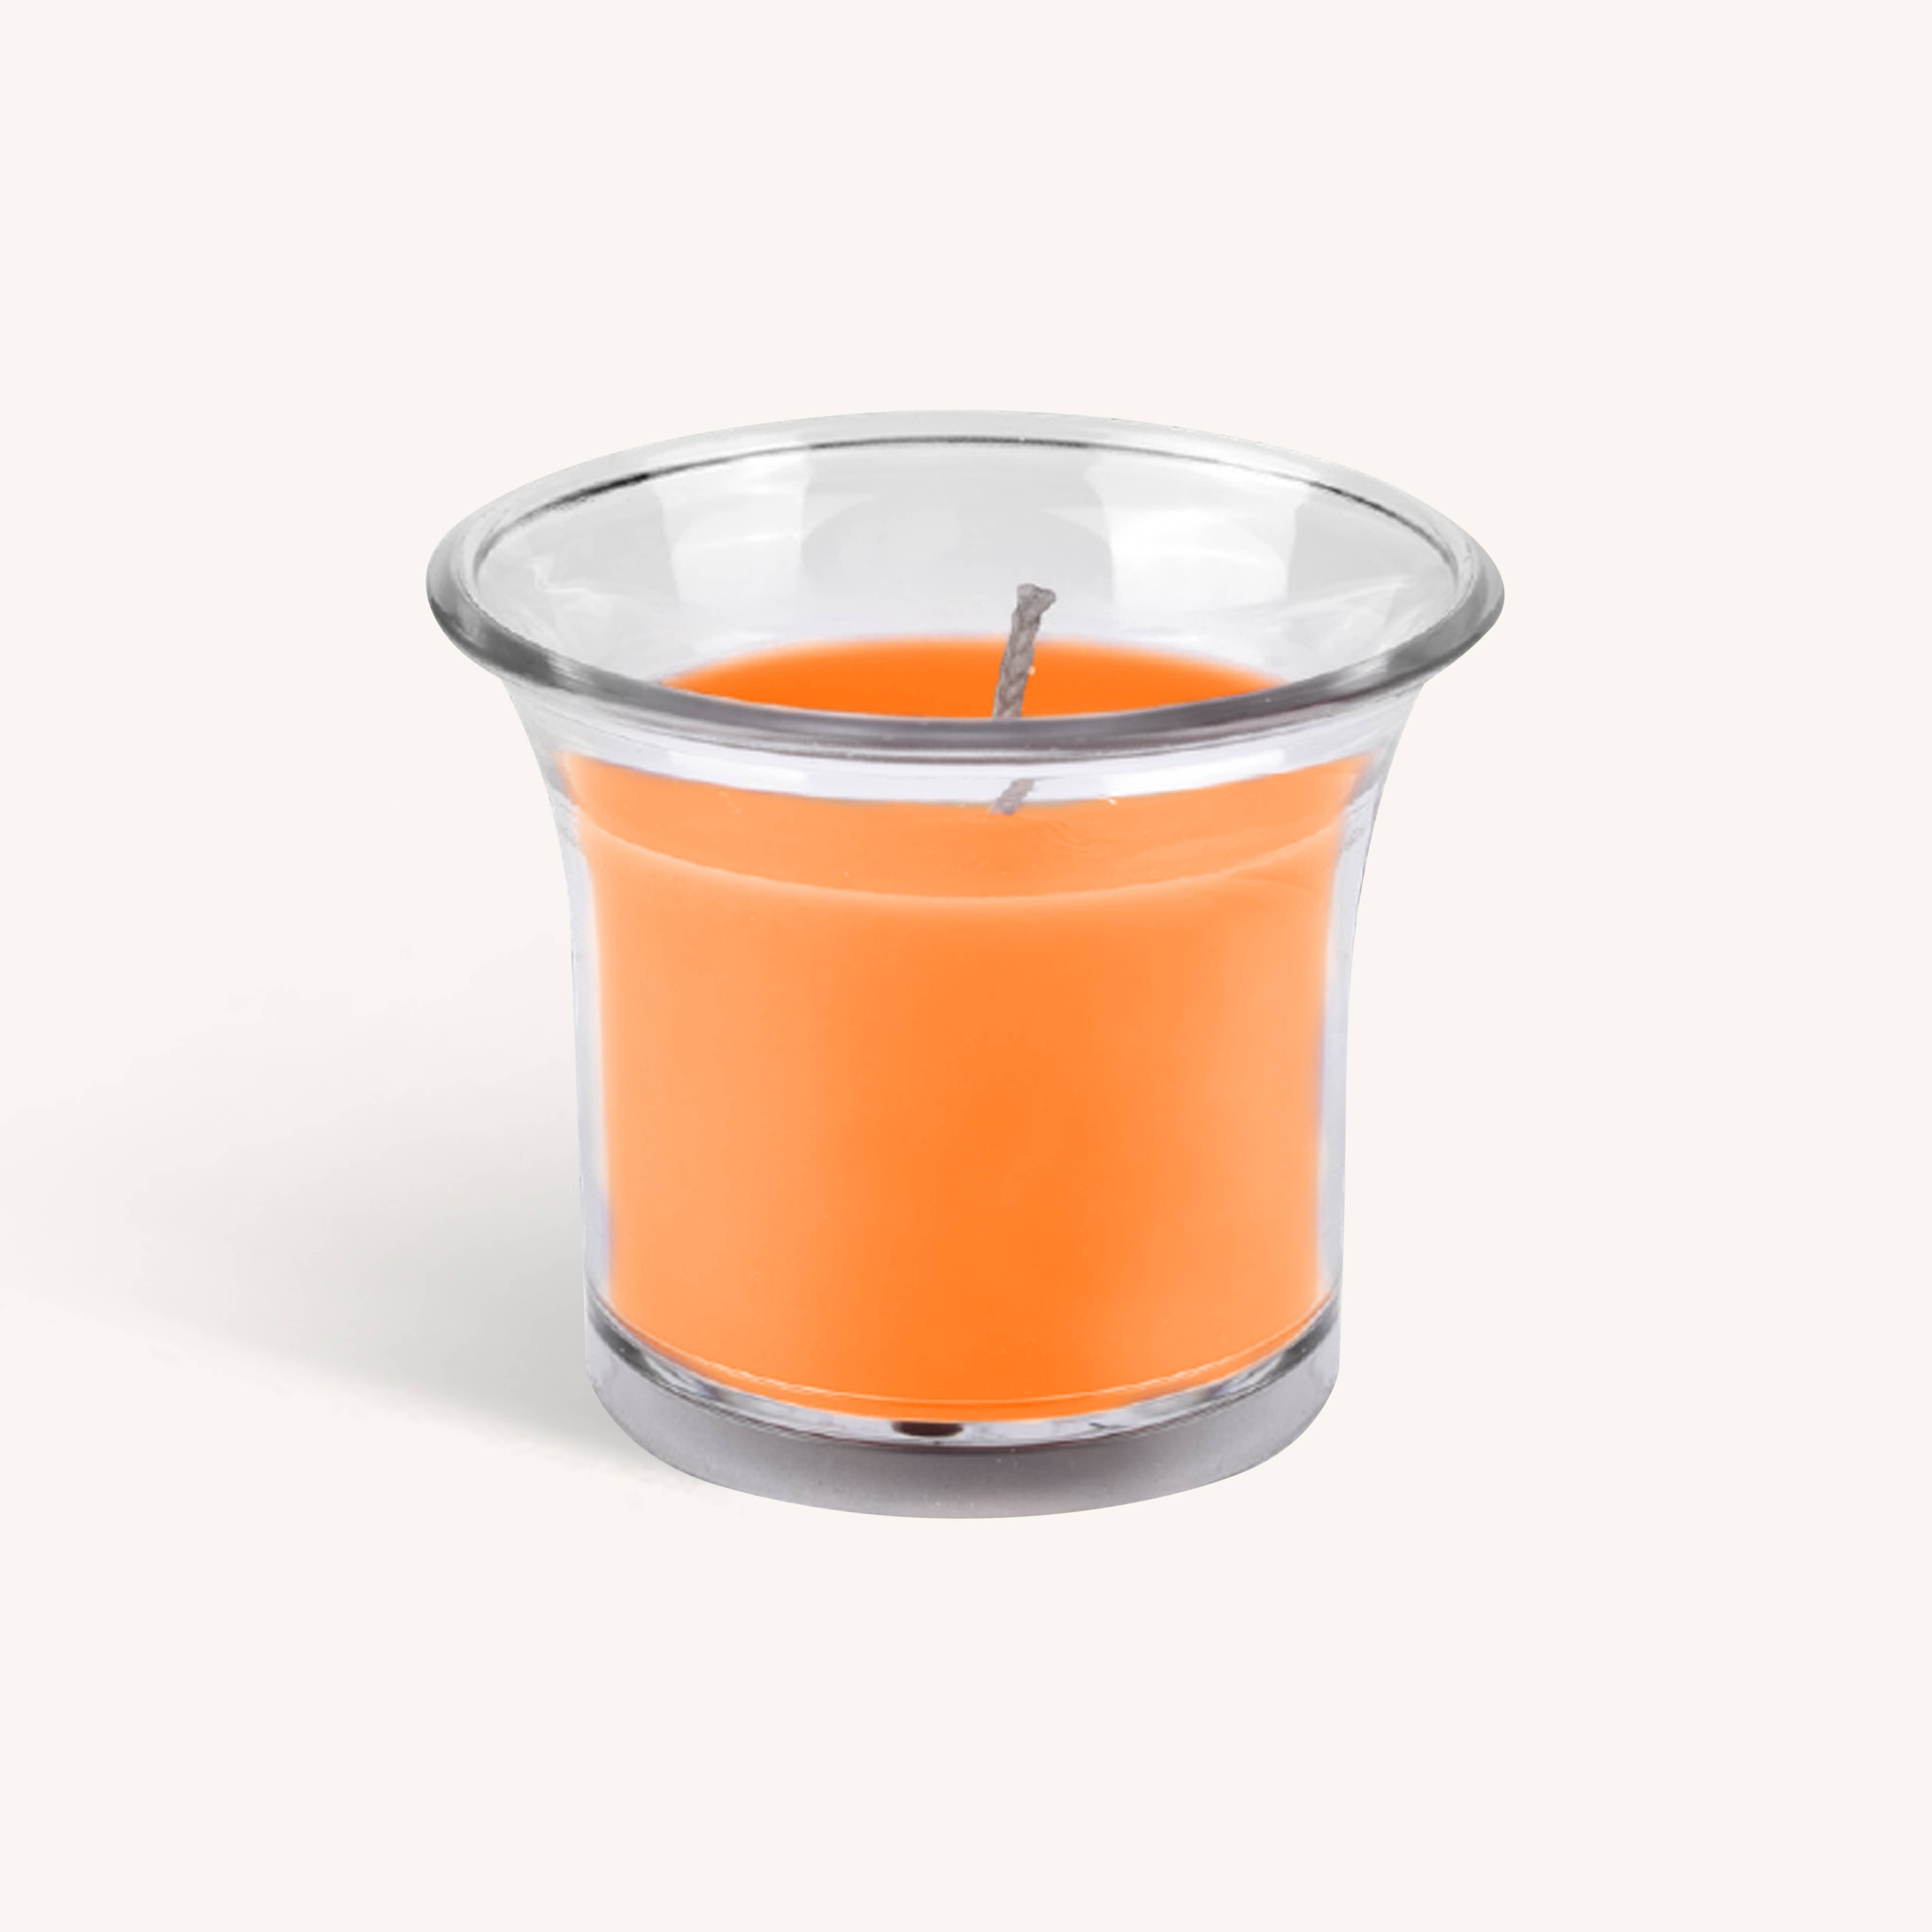 Scented Candles In Plastic Cups - Winter Orange - 12Hr - 4Pk